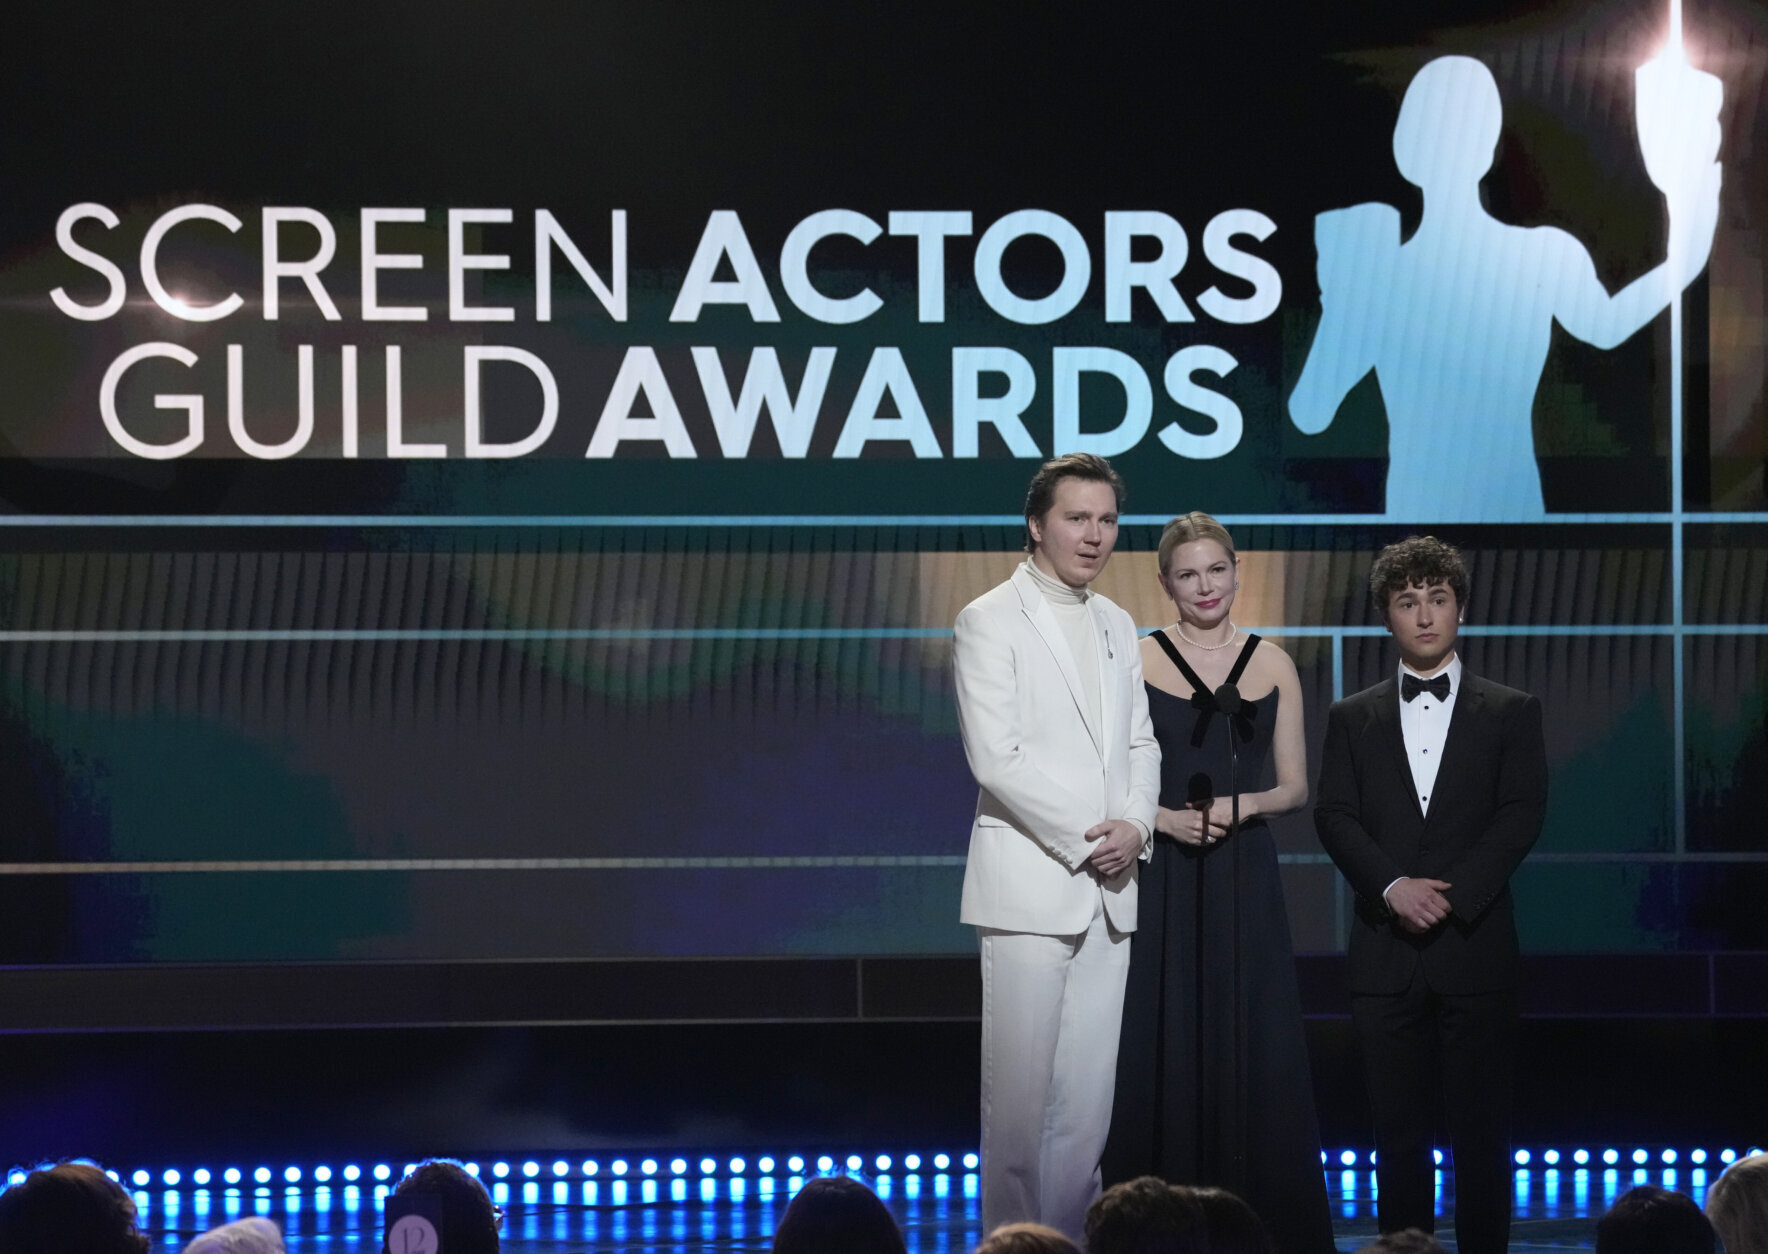 Paul Dano, from left, Michelle Williams and Gabriel LaBelle, members of the cast of "The Fablemans," introduce a clip from their film at the 29th annual Screen Actors Guild Awards on Sunday, Feb. 26, 2023, at the Fairmont Century Plaza in Los Angeles. (AP Photo/Chris Pizzello)